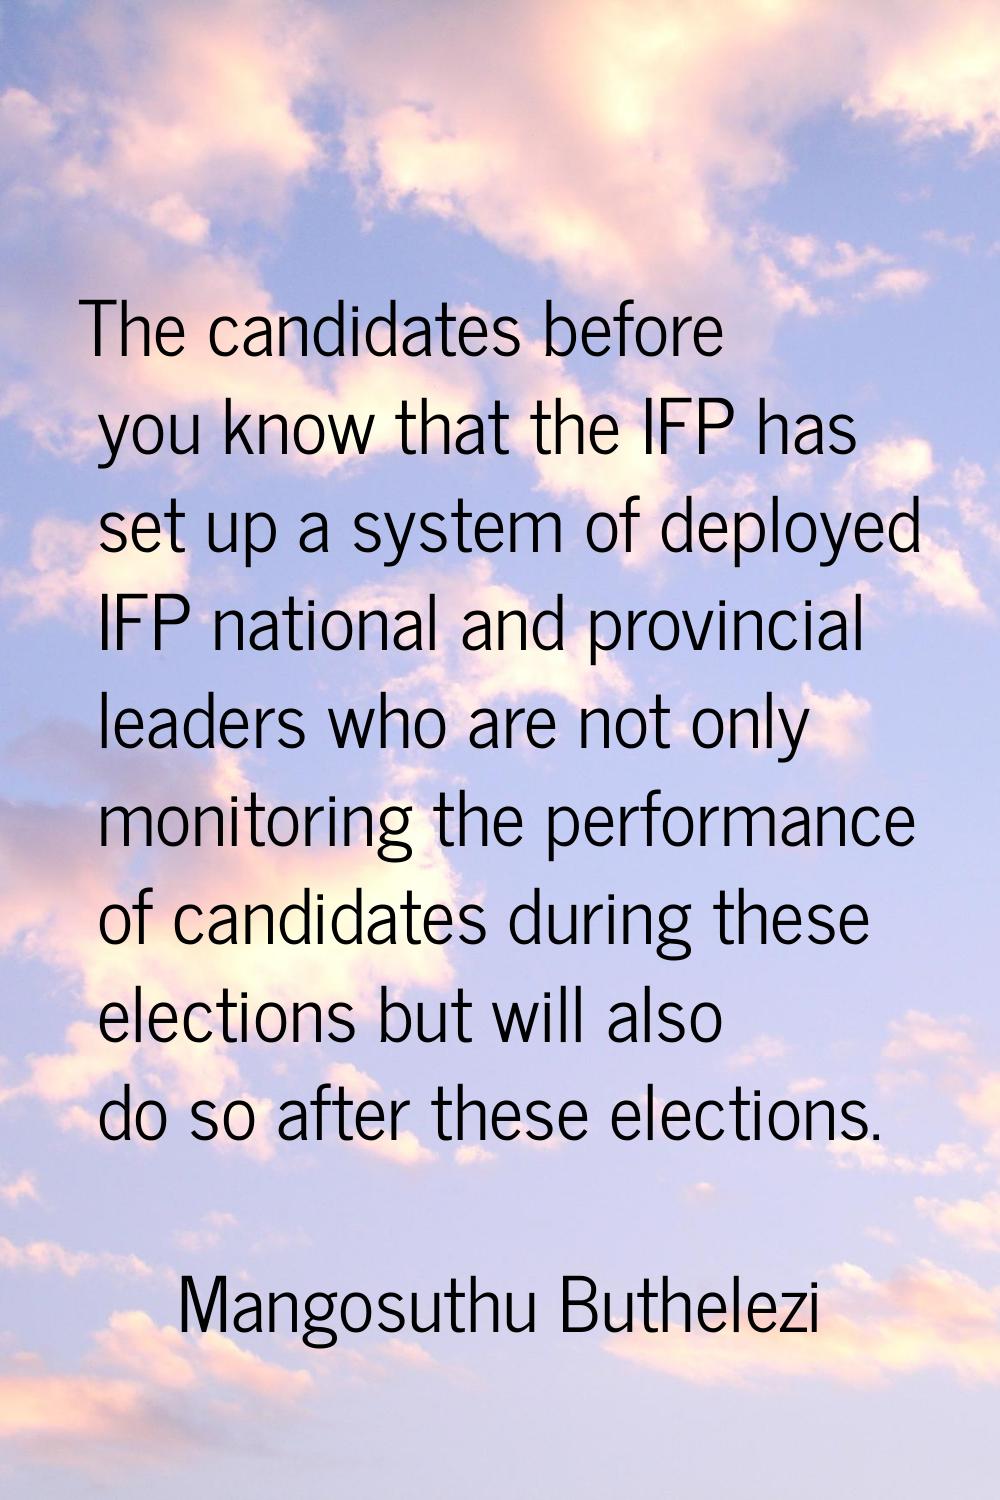 The candidates before you know that the IFP has set up a system of deployed IFP national and provin